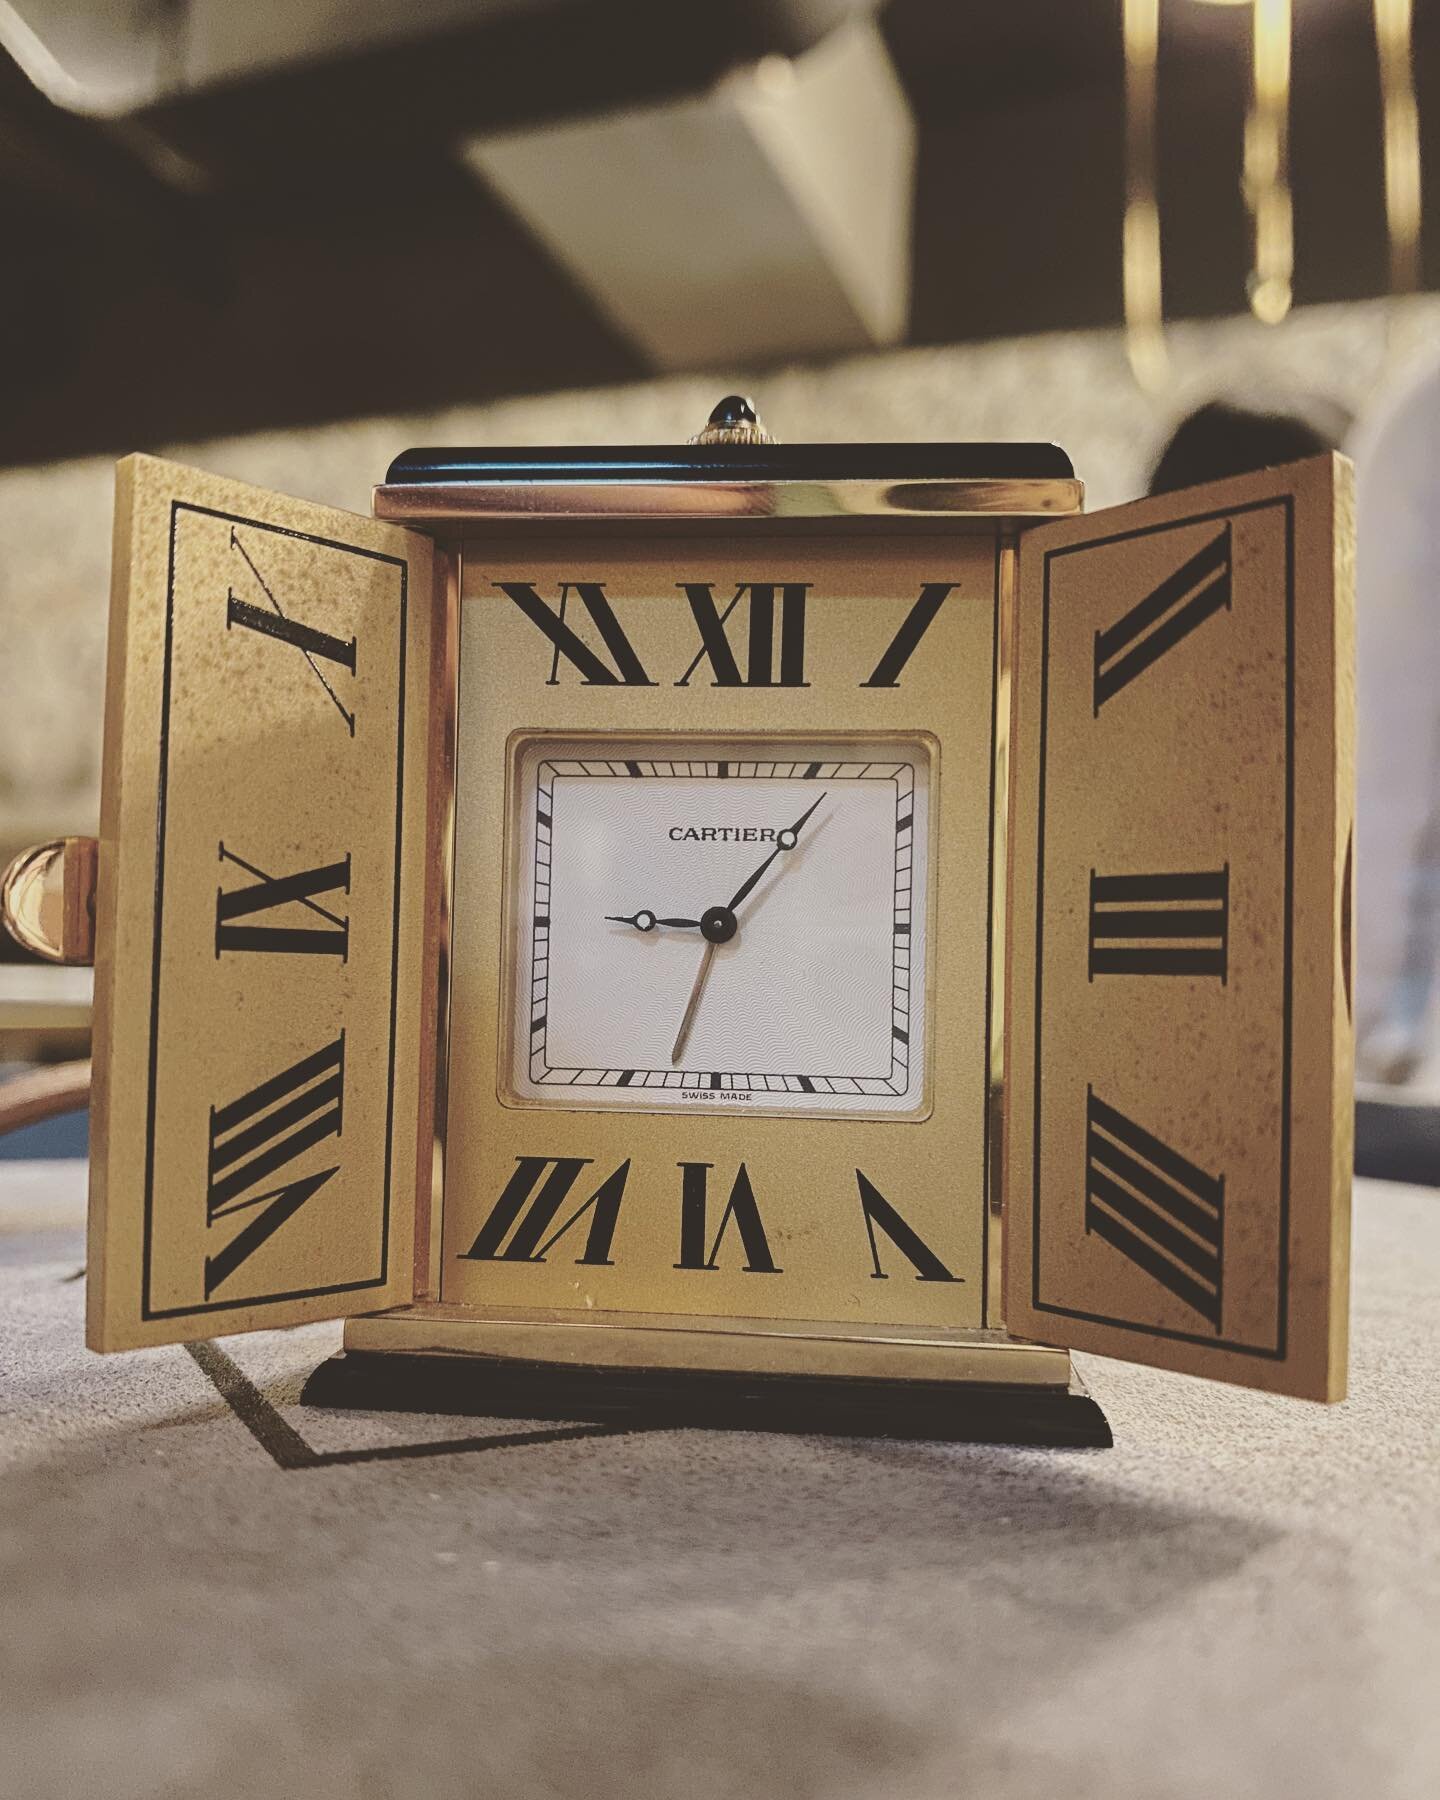 We love restoring Wrist Watches, Pocket Watches, Wall Clocks, Table Clocks, Travel Clocks&hellip;🤞🏻 For the love for horology, the more unique, the more vintage, the merrier!✌🏻

Spectacular Cartier Paris Art Deco Travel Alarm Clock owned by @watch